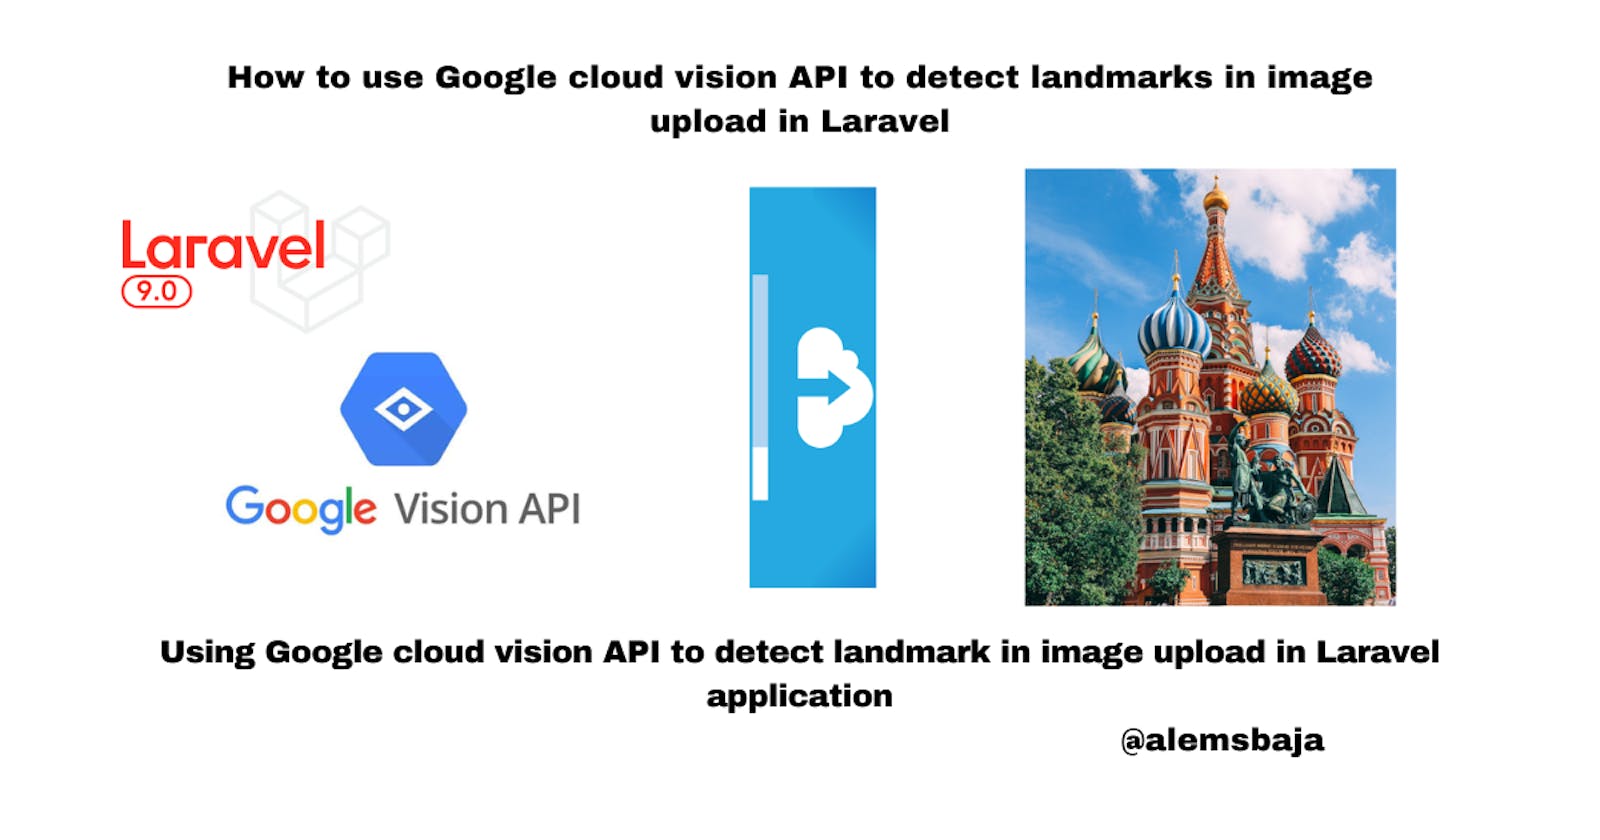 How to use Google cloud vision API to detect landmarks in image upload in Laravel